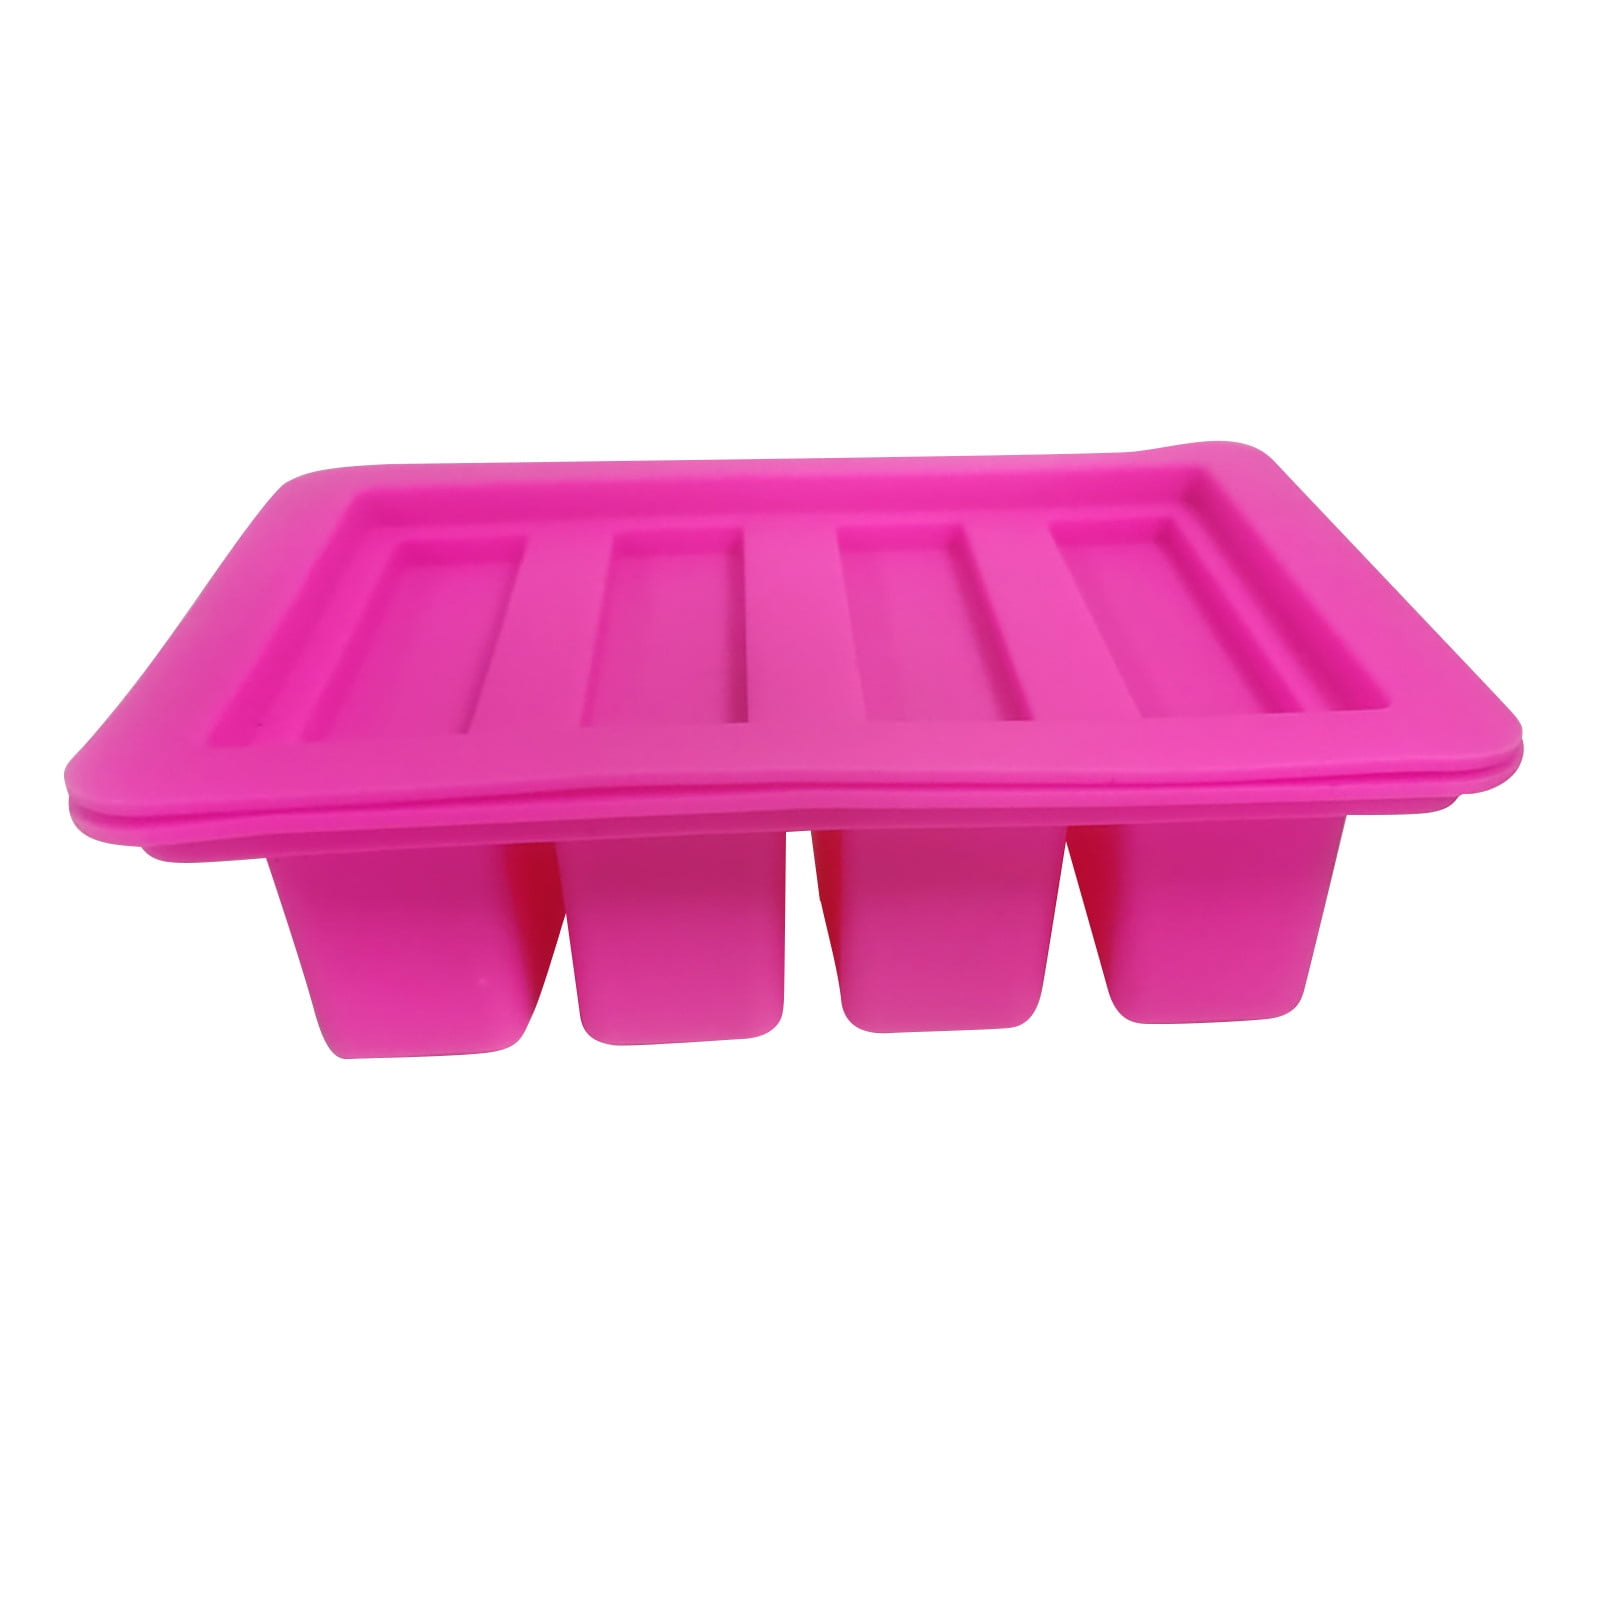 Ytuomzi Butter Mold with Lid, Silicone Butter Tray Container for Making 4  Butter Sticks, Food Grade Silicone Butter Molds for Butter Pudding, Ice